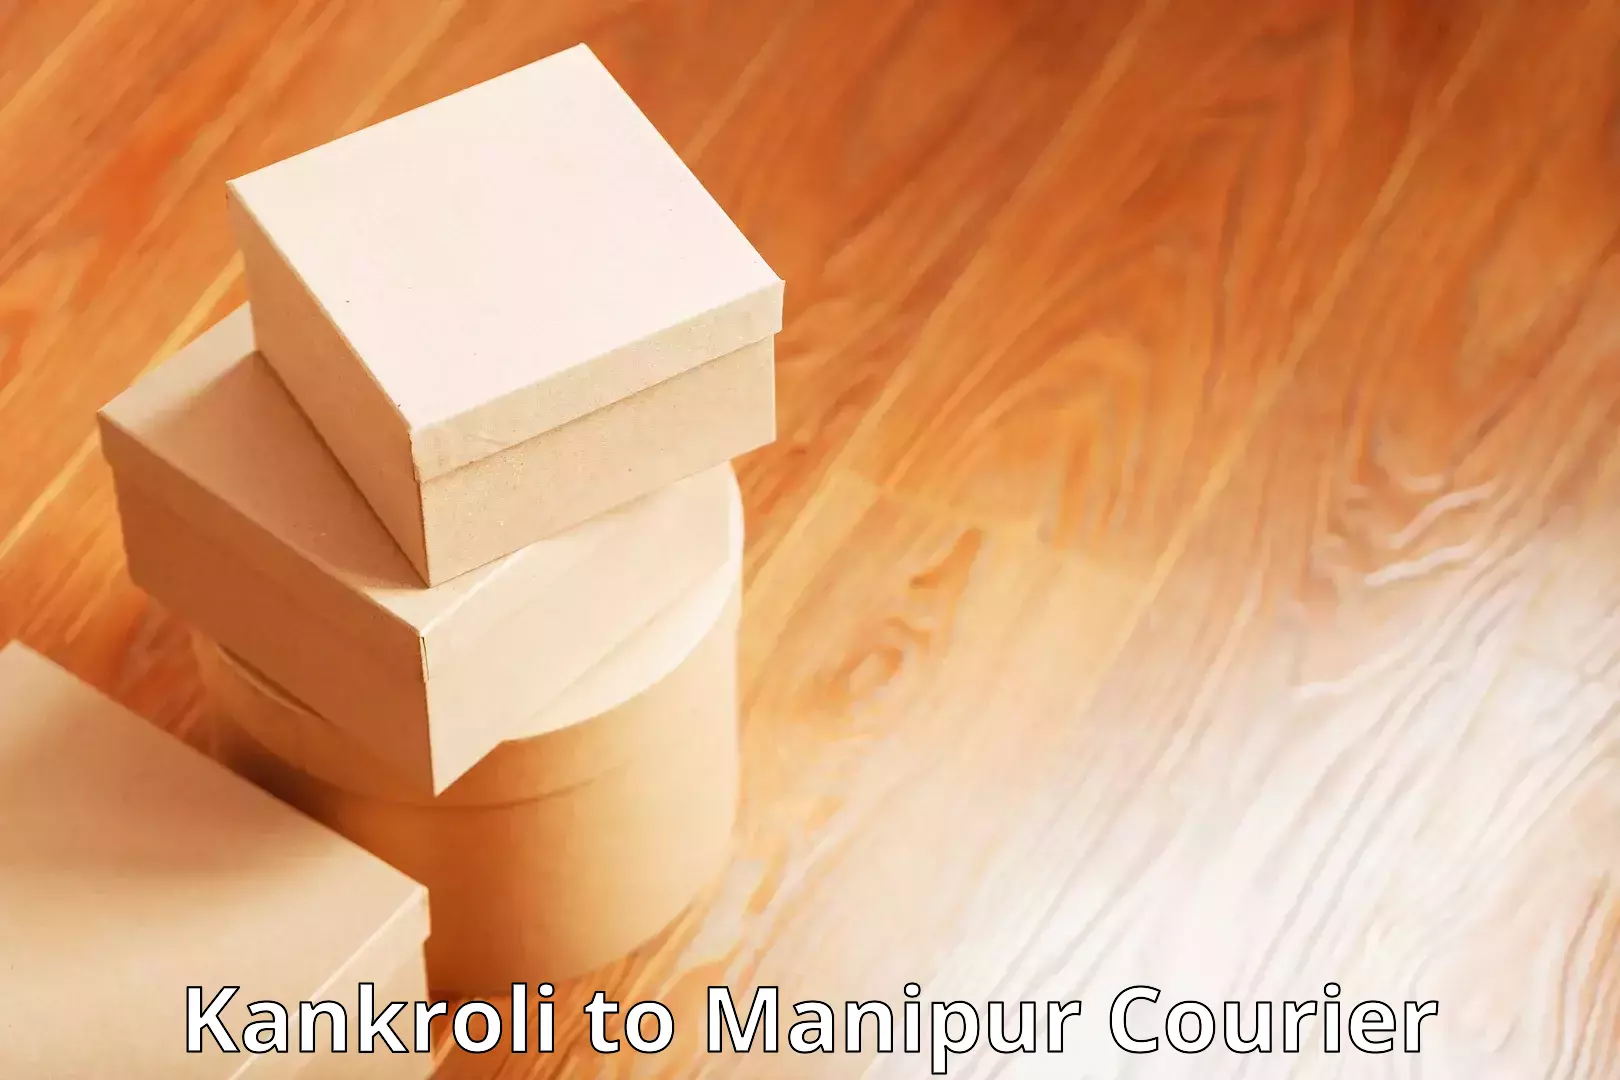 Local delivery service Kankroli to Manipur